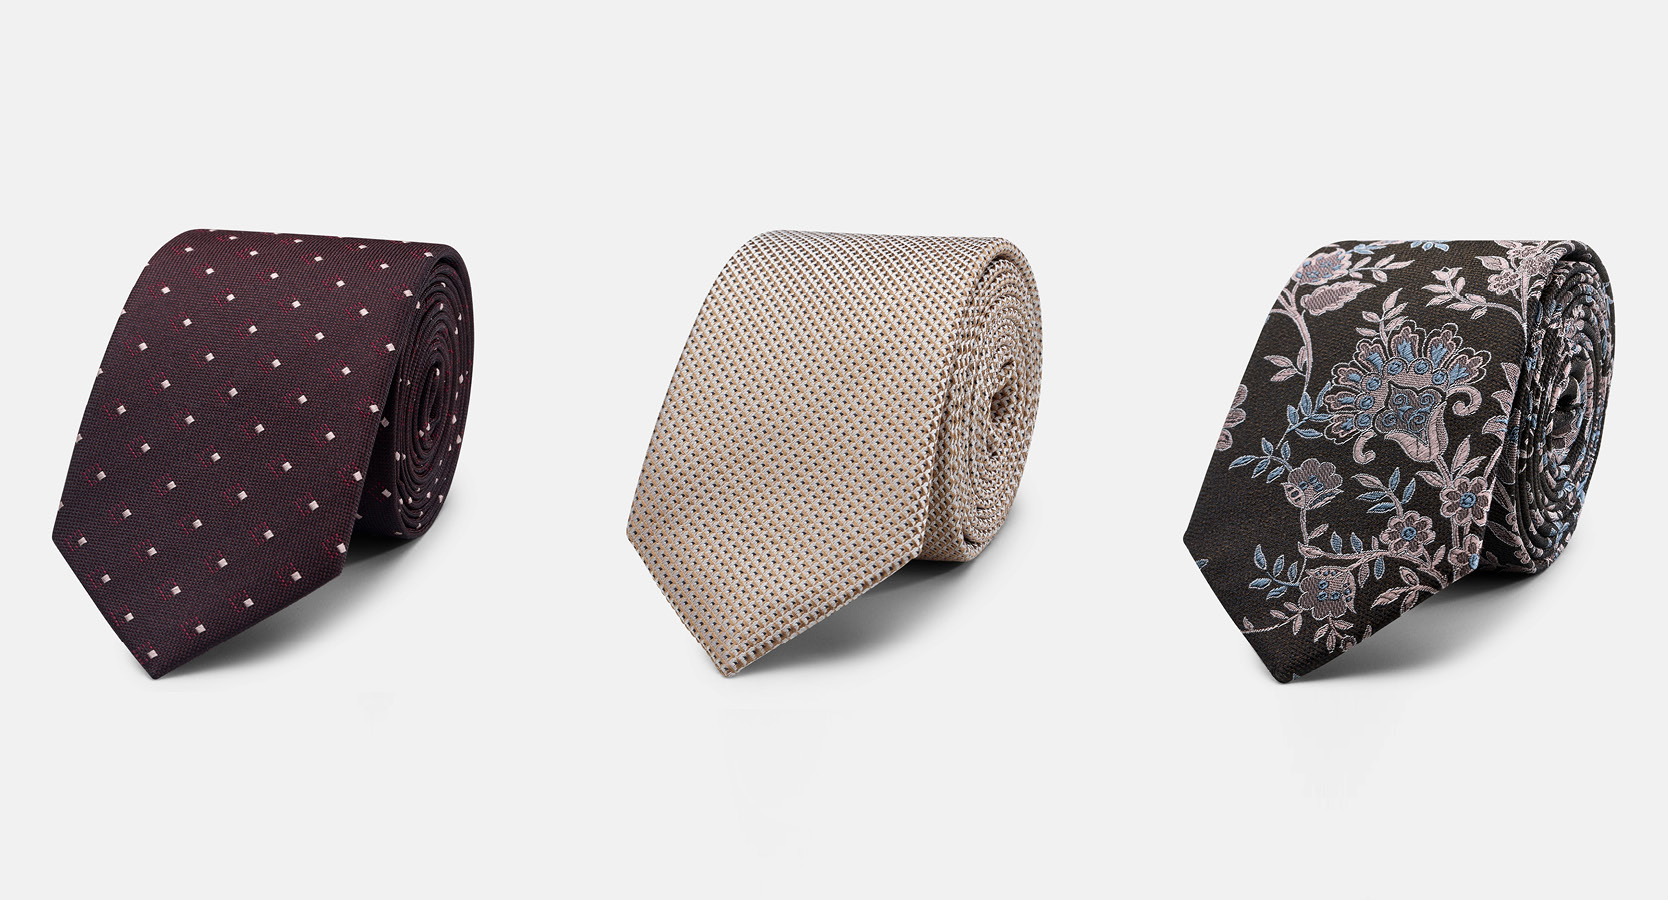 Flat lay of burgundy spotted tie, cream tie and floral tie